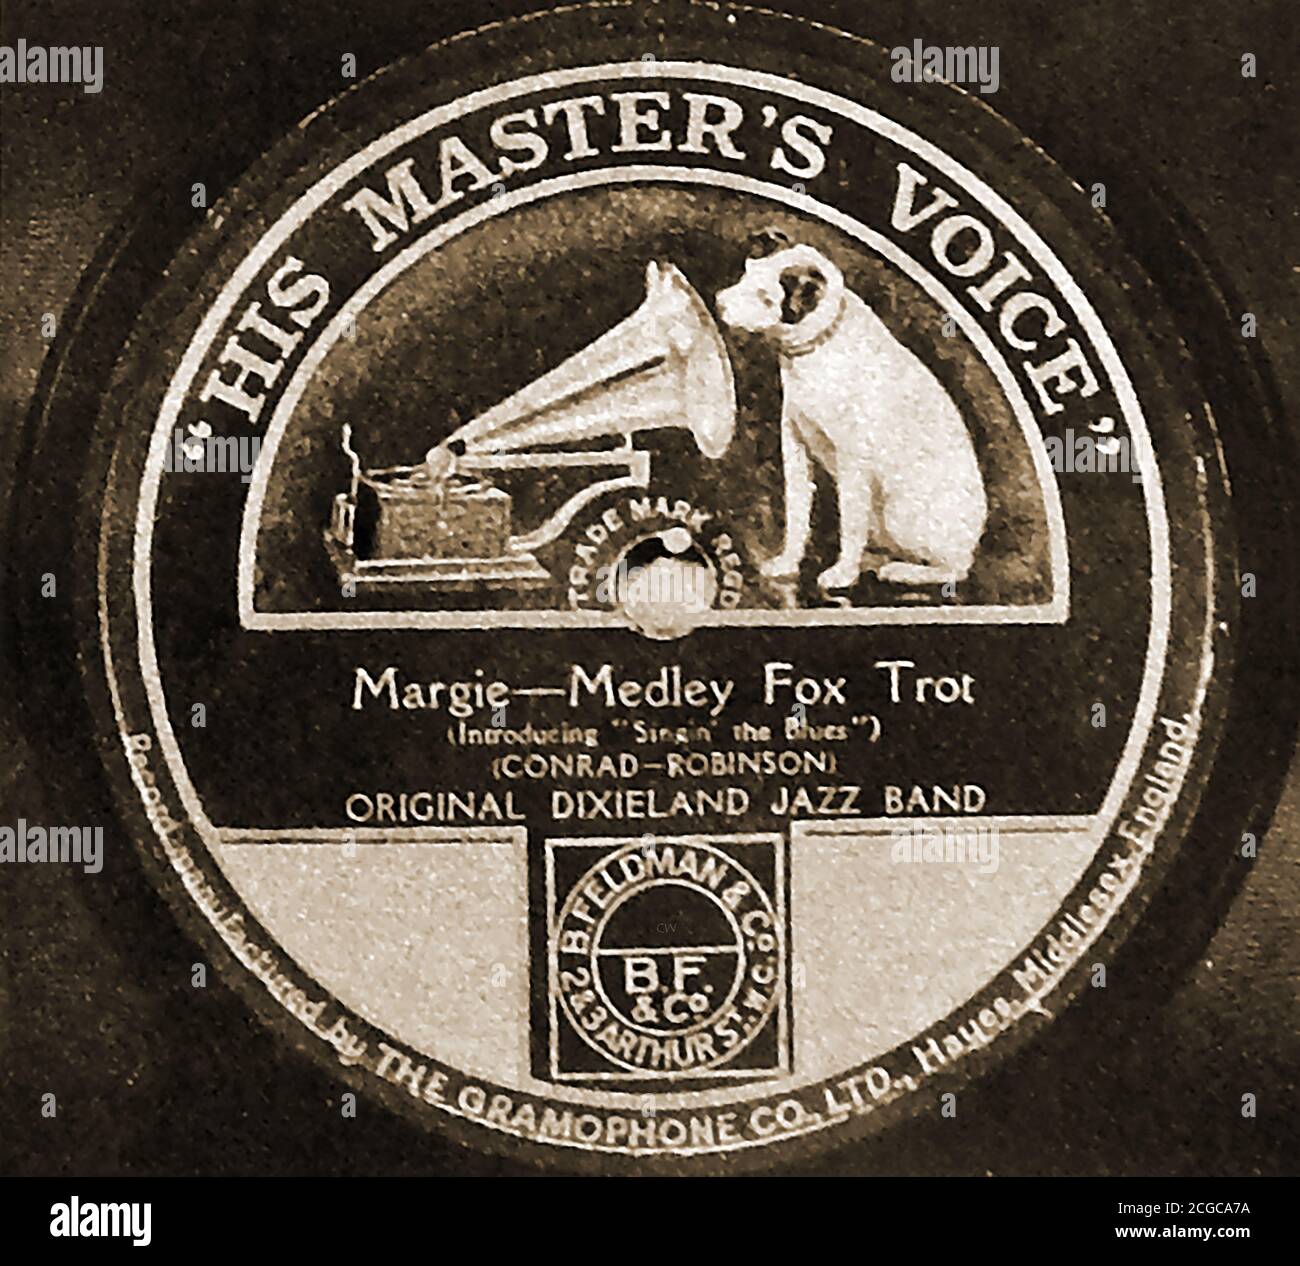 1922 - His Master's Voice record label featuring the Original Dixieland Jazz Band (Margie - Medley Fox Trot).  Originally known as The Original Dixieland Jass Band (ODJB) , In late 1917 the spelling of the band's name was changed. The band  made the first jazz recordings ever in early 1917. Their  recording of  'Livery Stable Blues' became the first jazz record ever made. Stock Photo